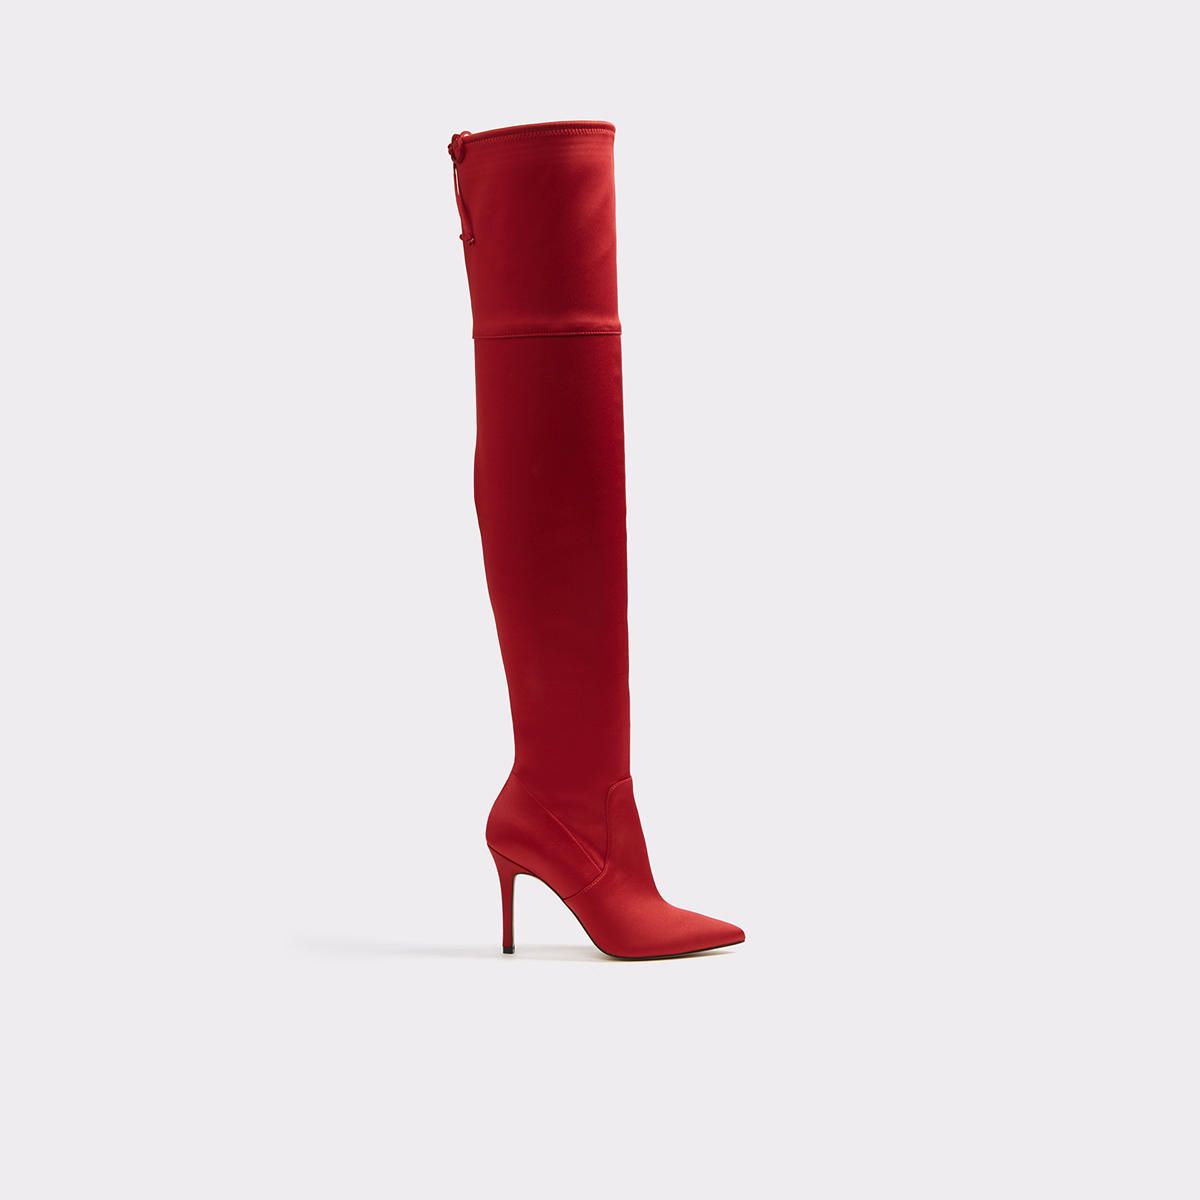 Search - red boots | Aldo Shoes (US)